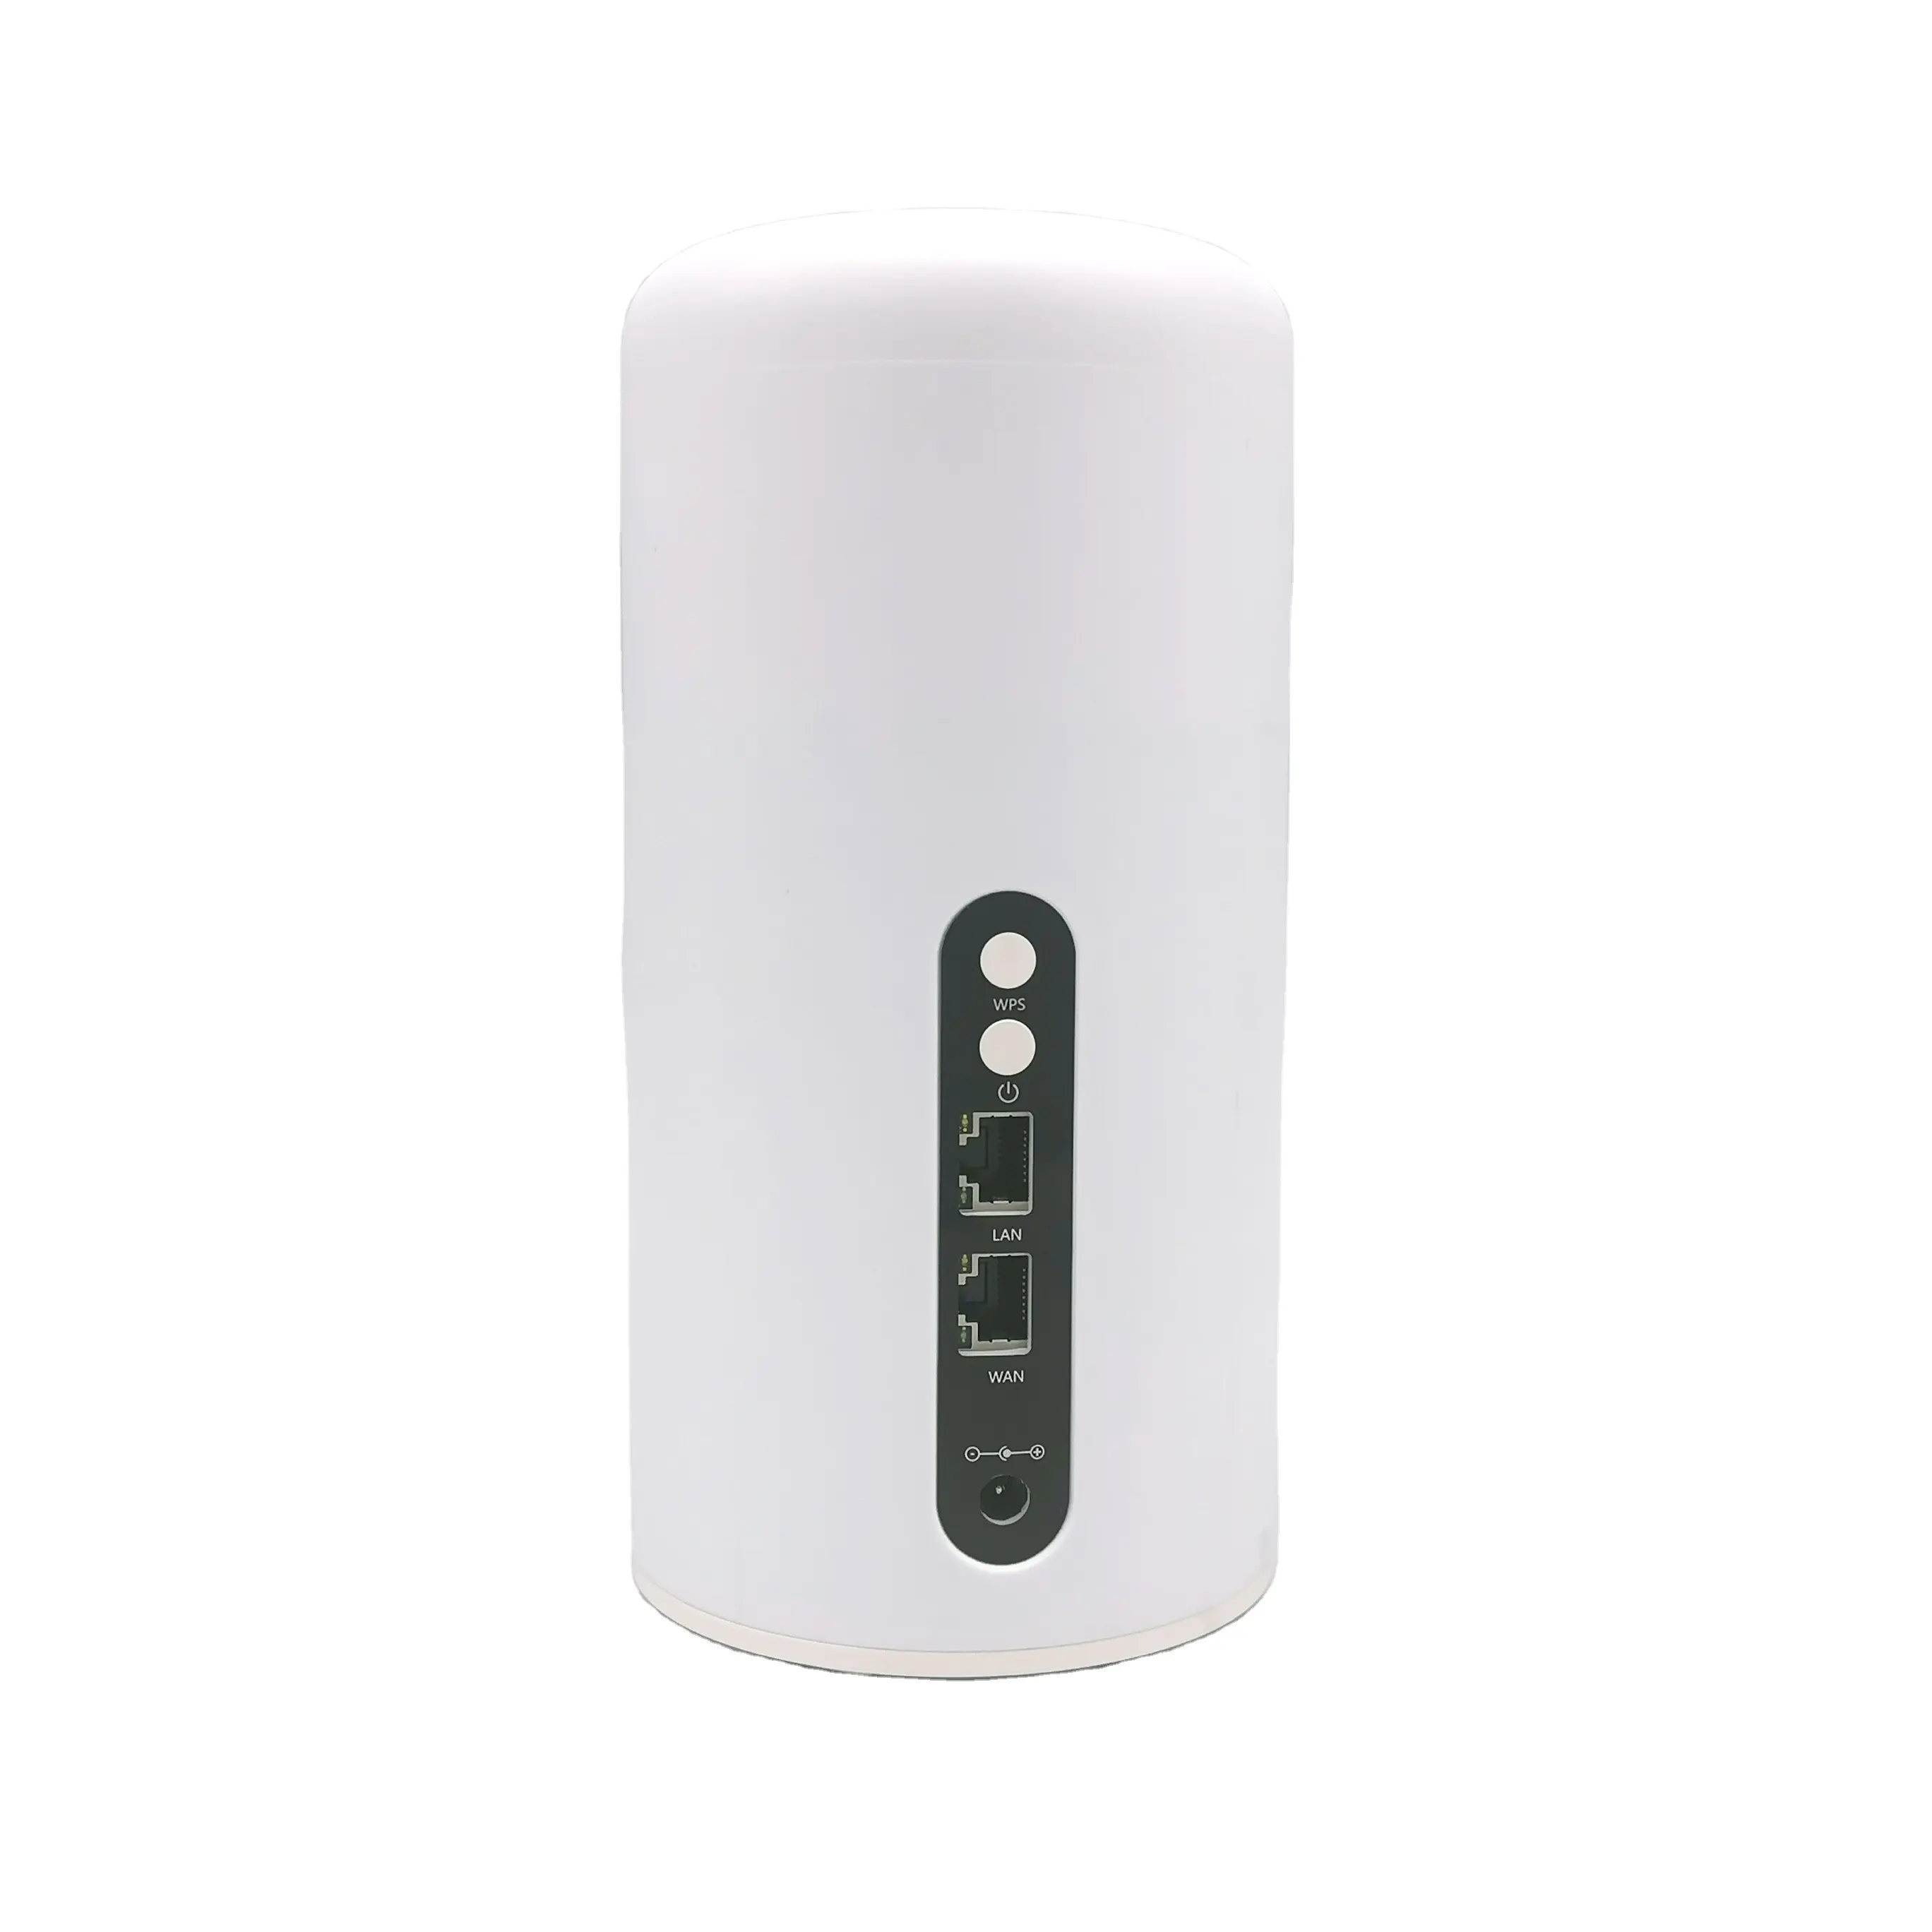 5G Network Dual Band 1800Mbps High Speed Wifi Support 5G Module Gigabit Wireless Wifi 6 Routers